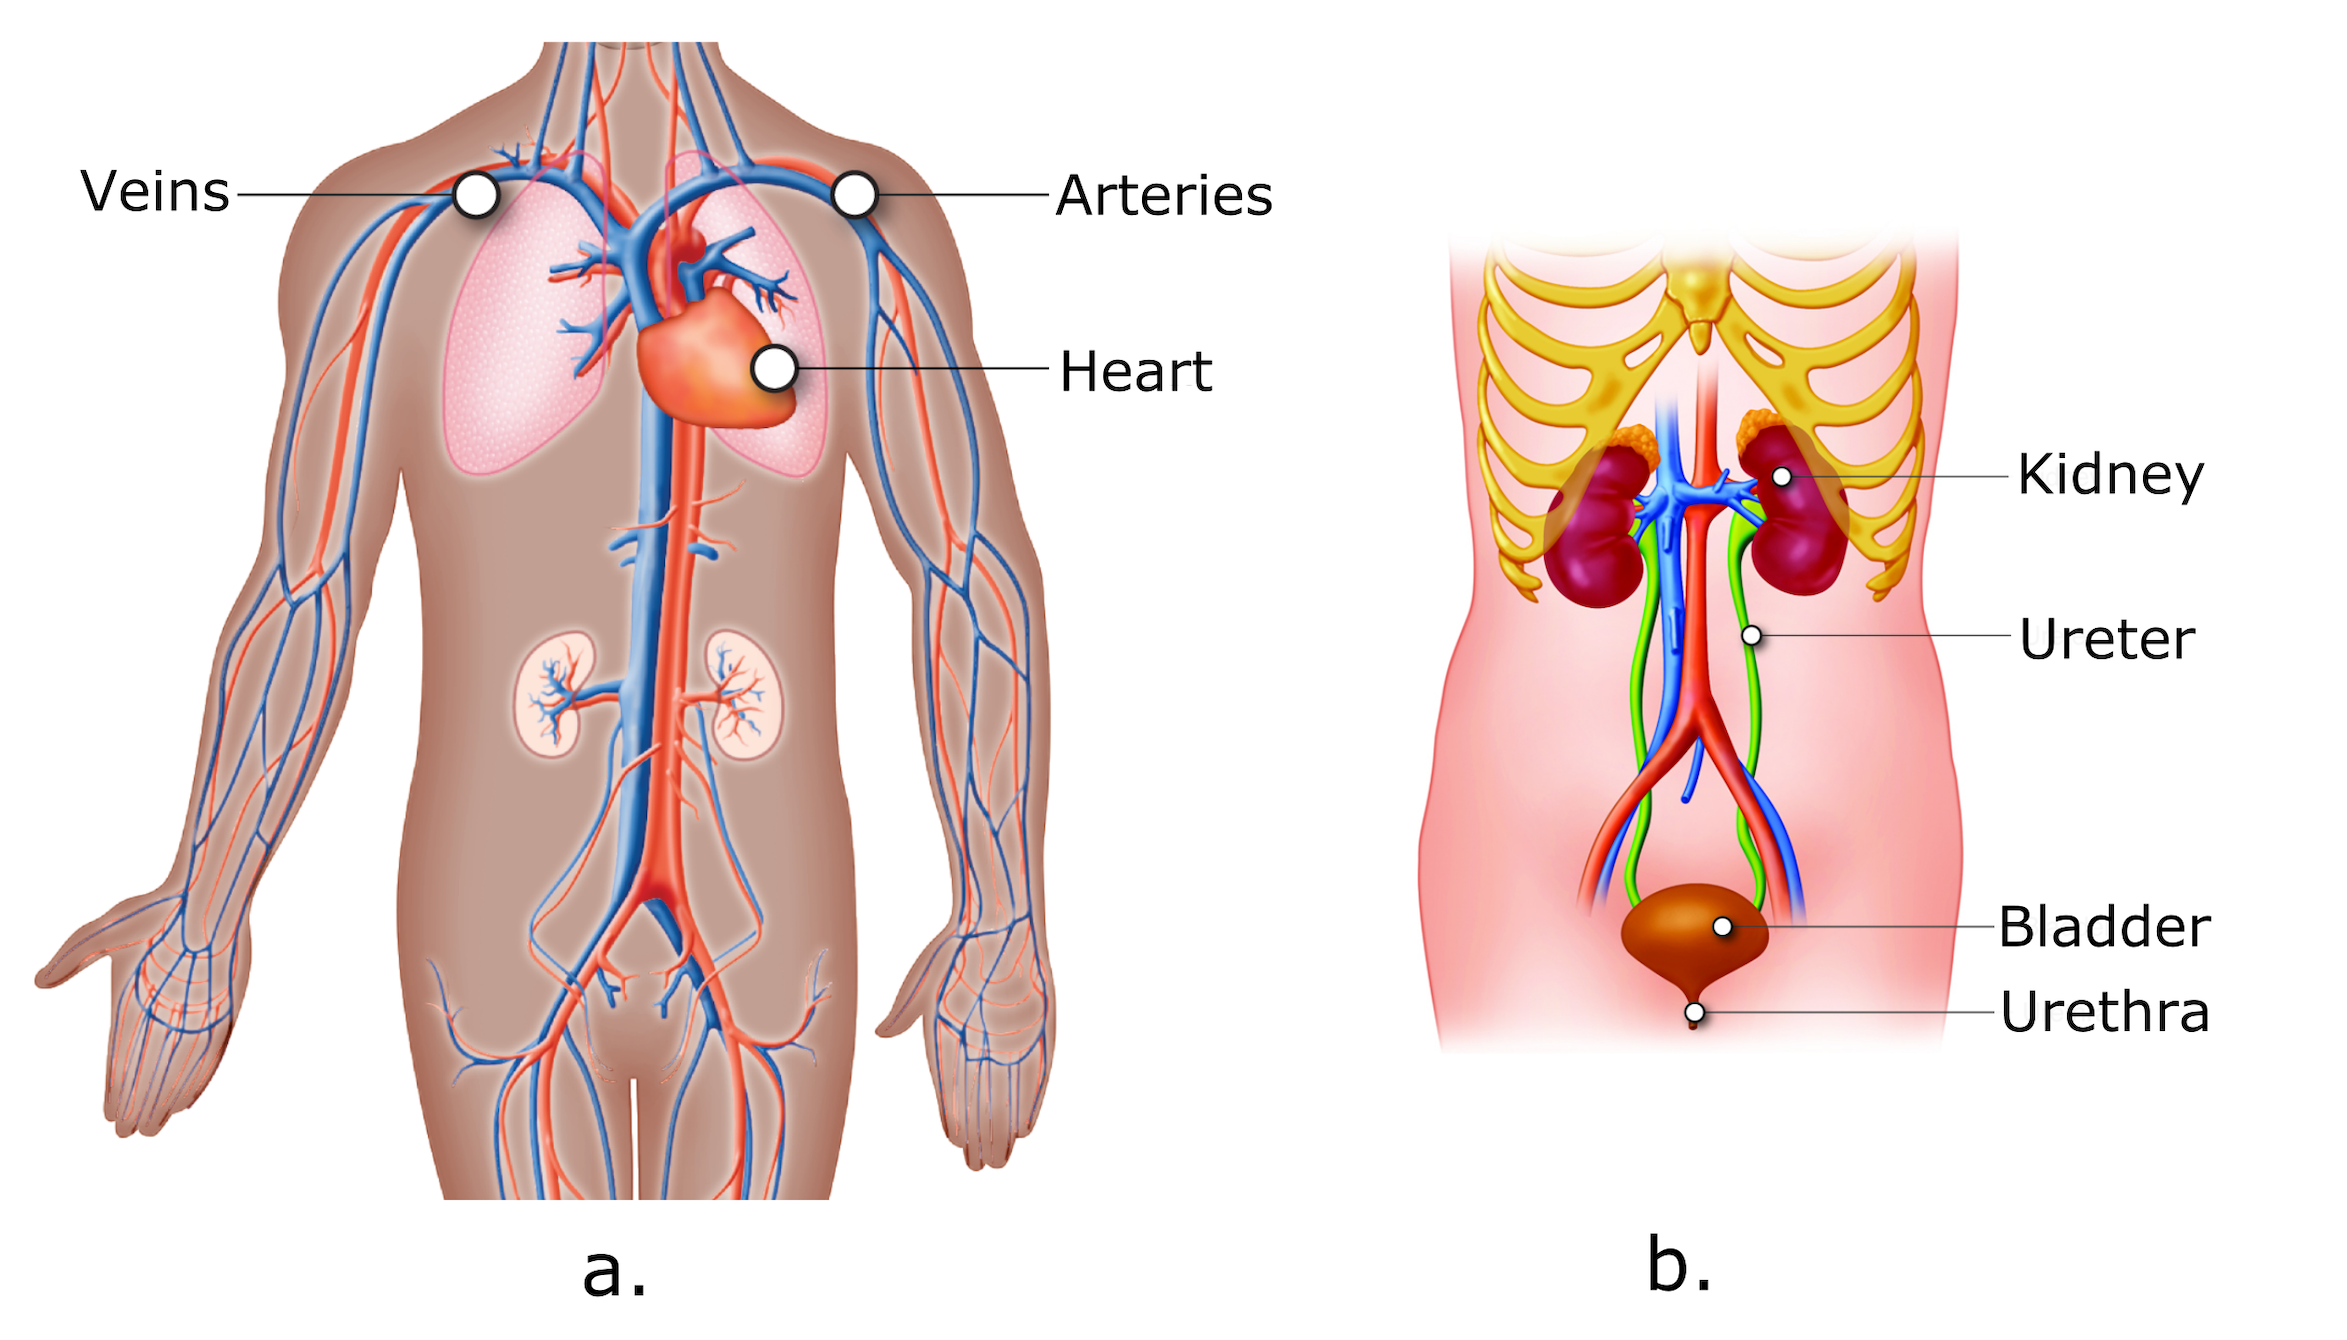 Labeled diagrams of the cardiovascular and urinary systems